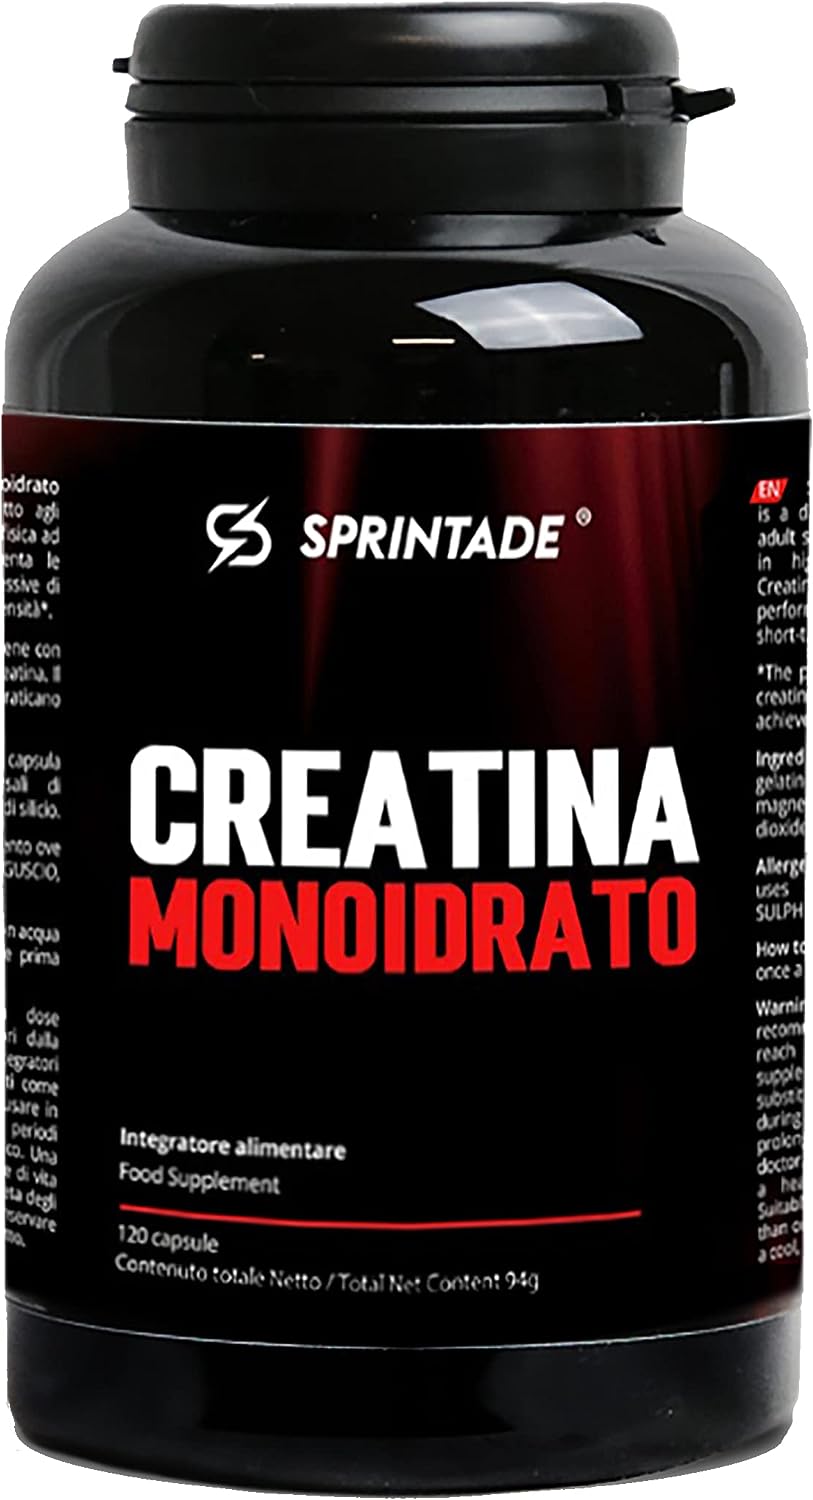 CREATINE MONOHYDRATE - 120 Capsules - 3g Daily dose - Food Supplement for Sports, Fitness, Bodybuilding, Cycling, Training